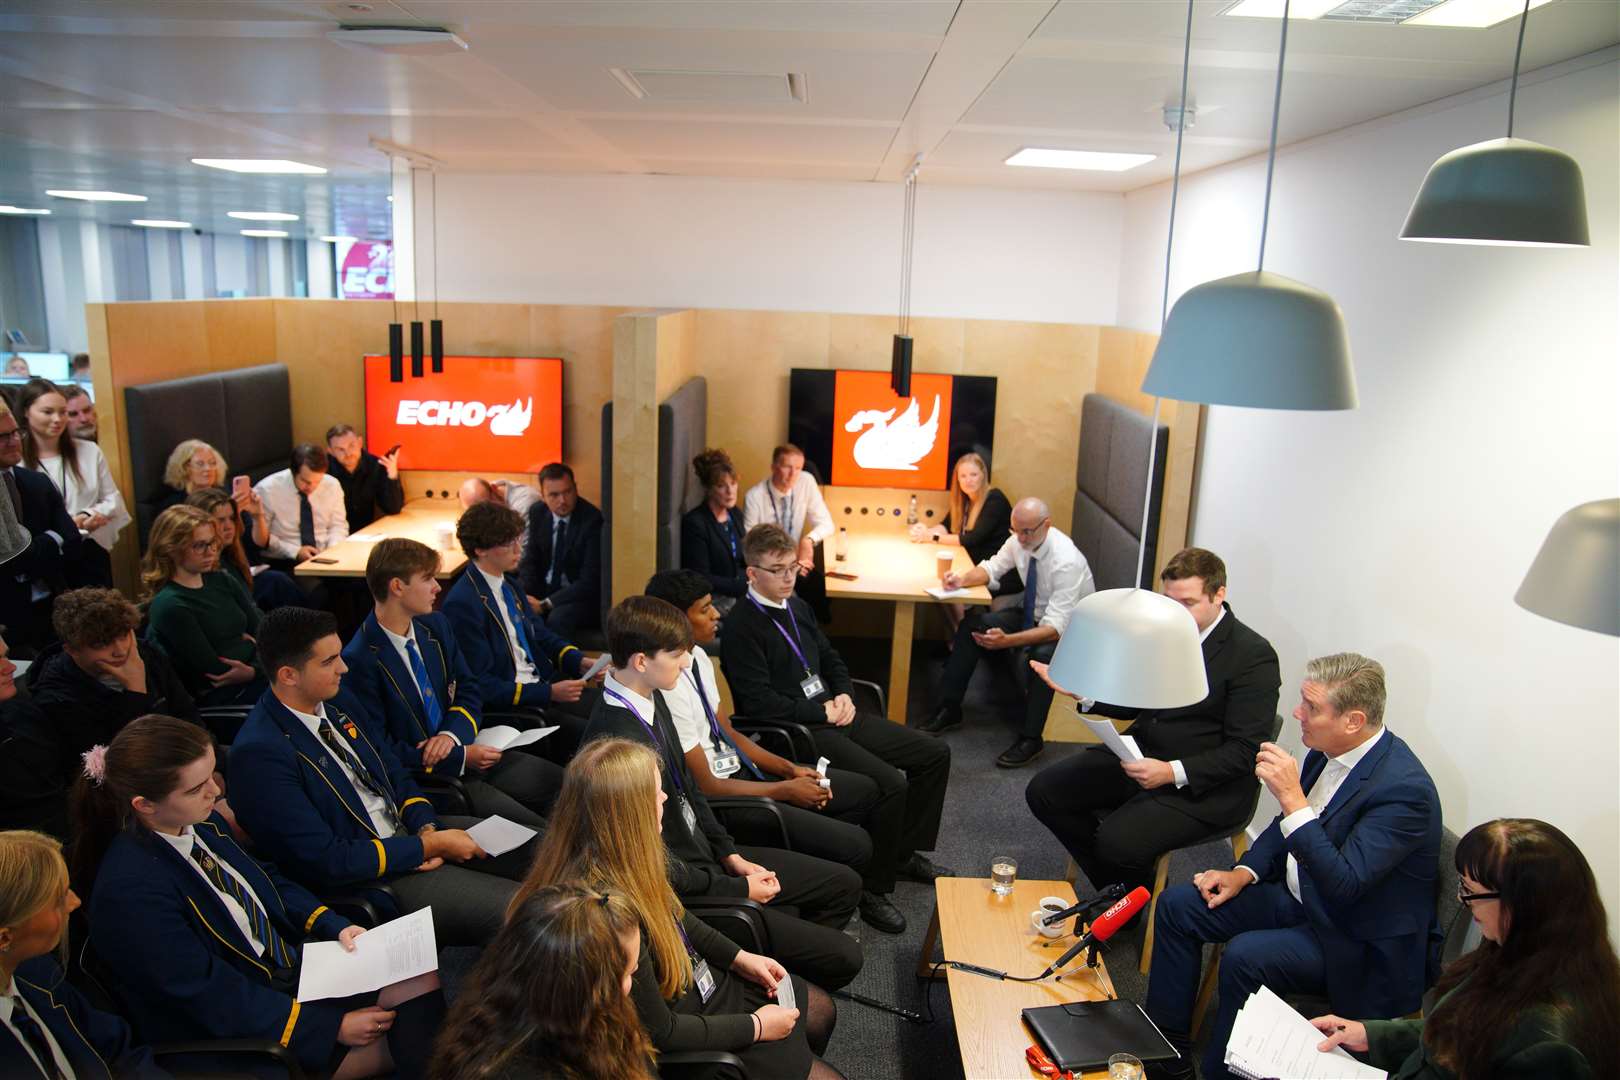 Sir Keir Starmer took part in a Q&A session with students at the Liverpool Echo offices (Peter Byrne/PA)